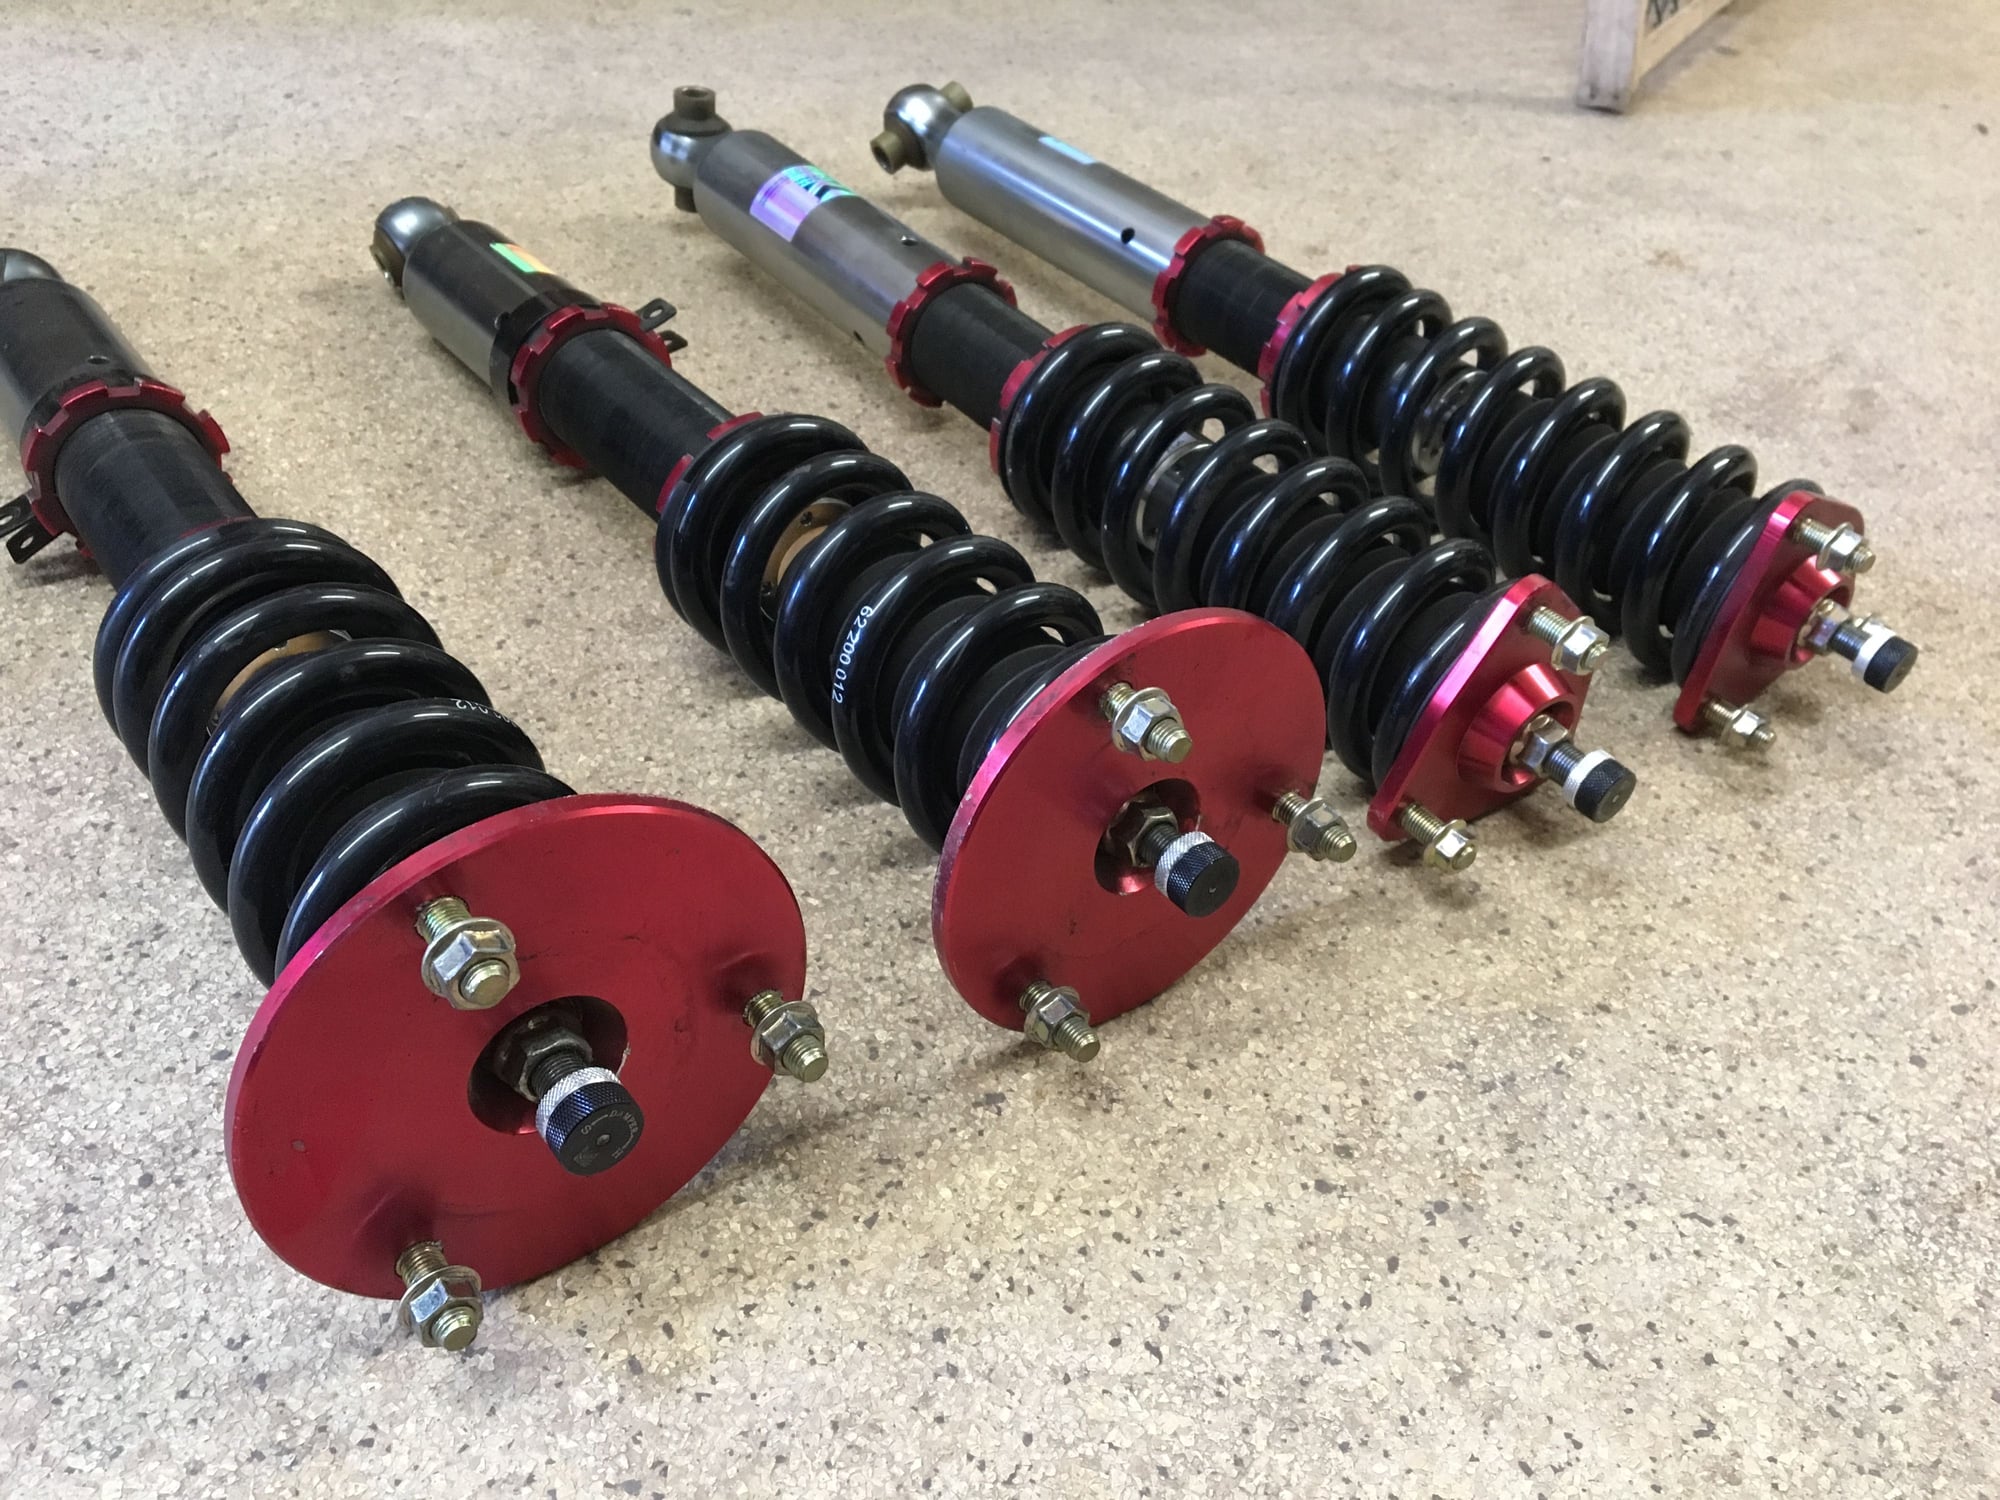 Steering/Suspension - FS: Megan Racing LP Coilovers - Used - 2006 to 2012 Lexus IS250 - Huntington Beach, CA 92648, United States